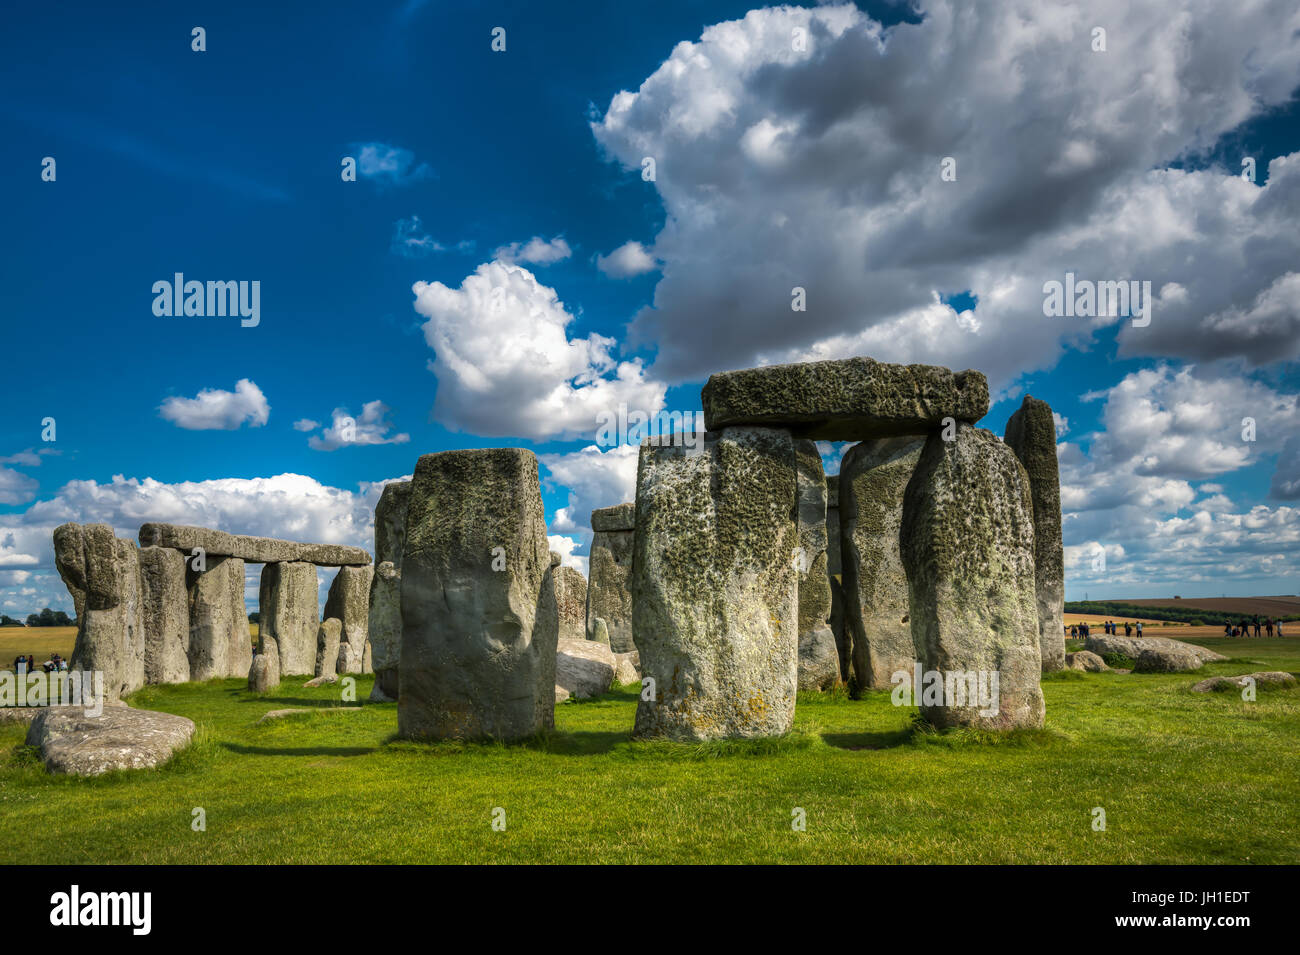 Stonehenge, Wiltshire, United Kingdom.The site and its surroundings were added to UNESCO's list of World Heritage Sites in 1986. Stock Photo